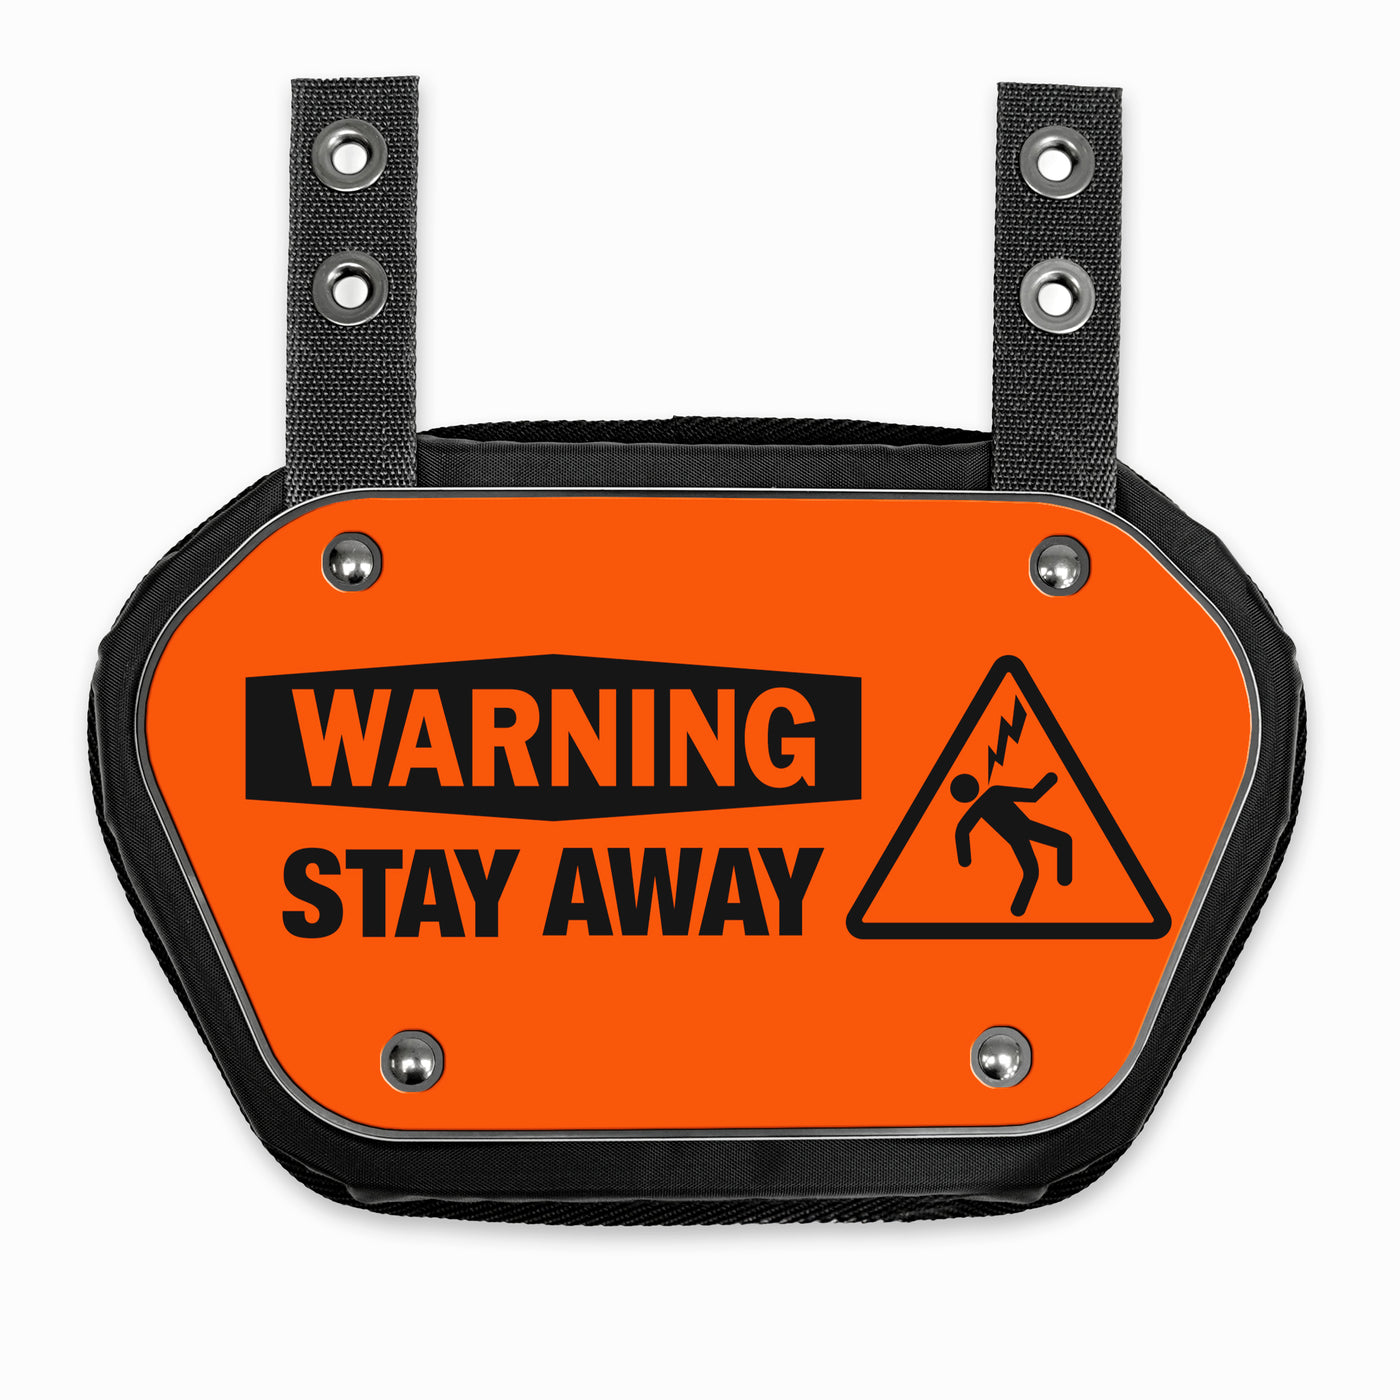 Warning Stay Away Sticker for Back Plate